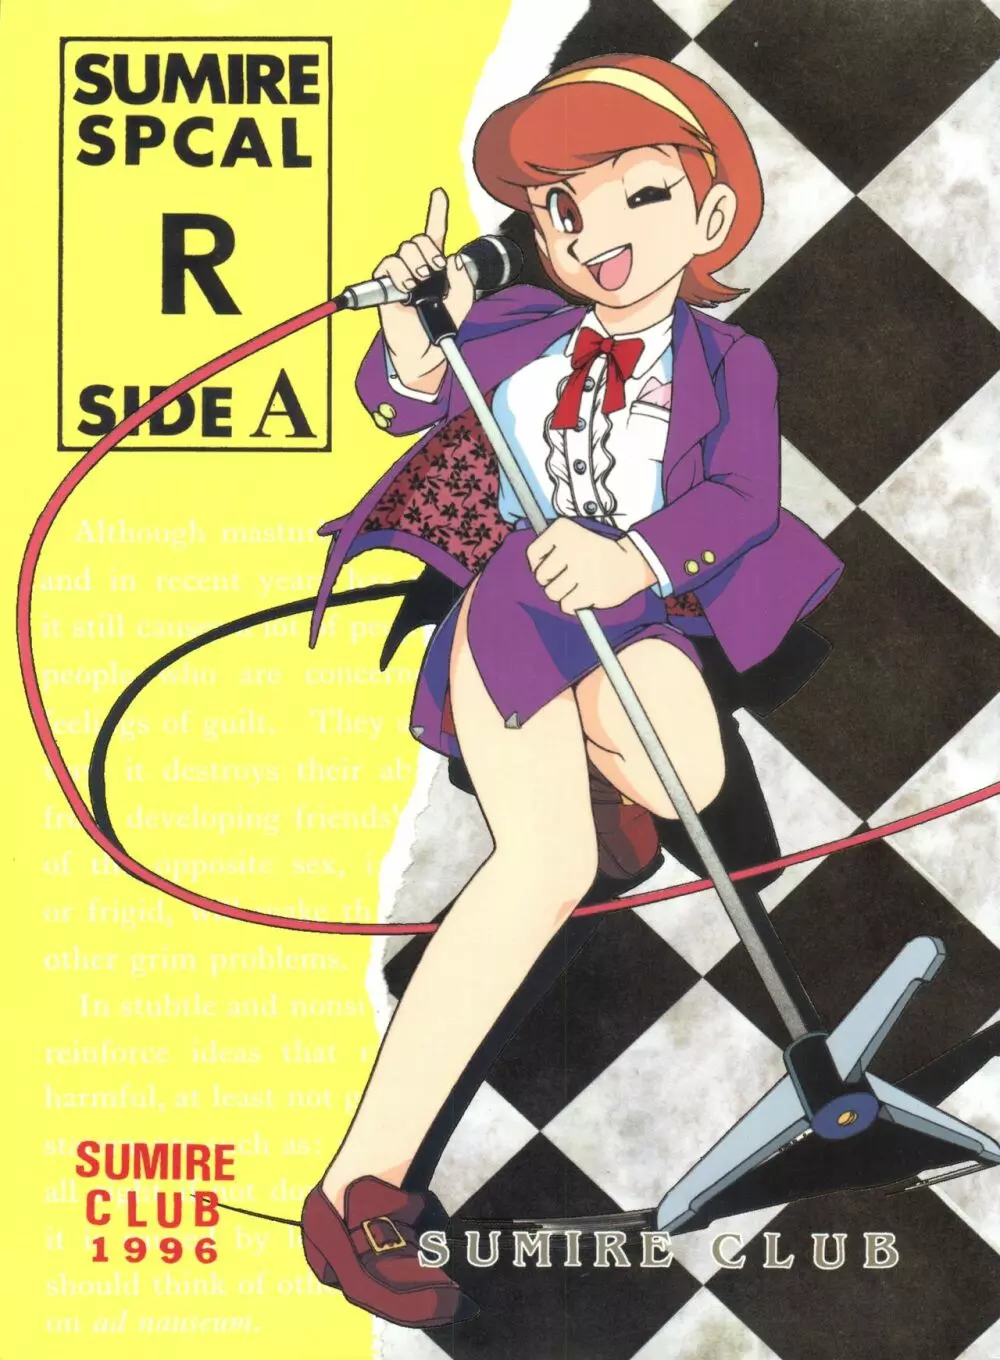 SUMIRE SPCAL R SIDE A Page.1